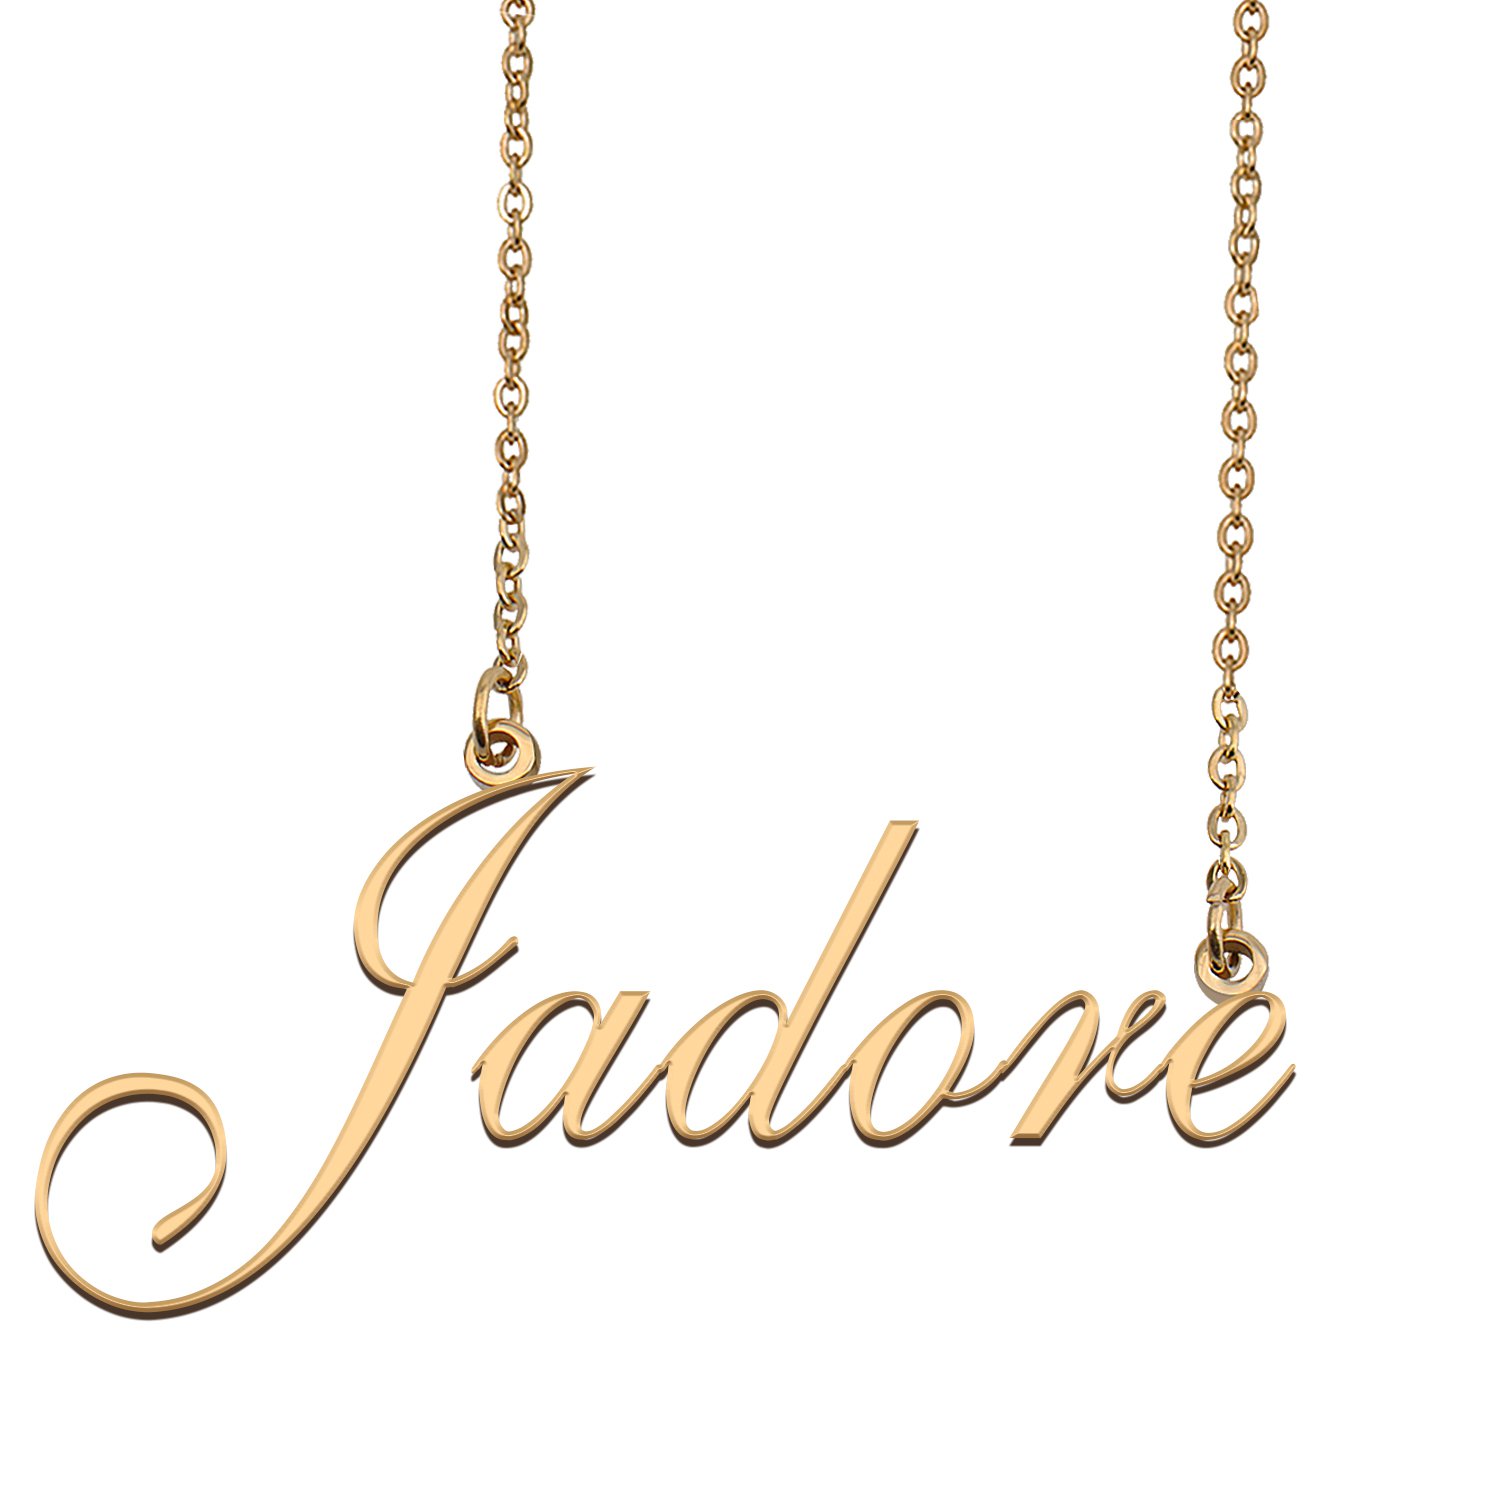 Personalized My Name Necklace Dainty personal Initial Necklace Jadore